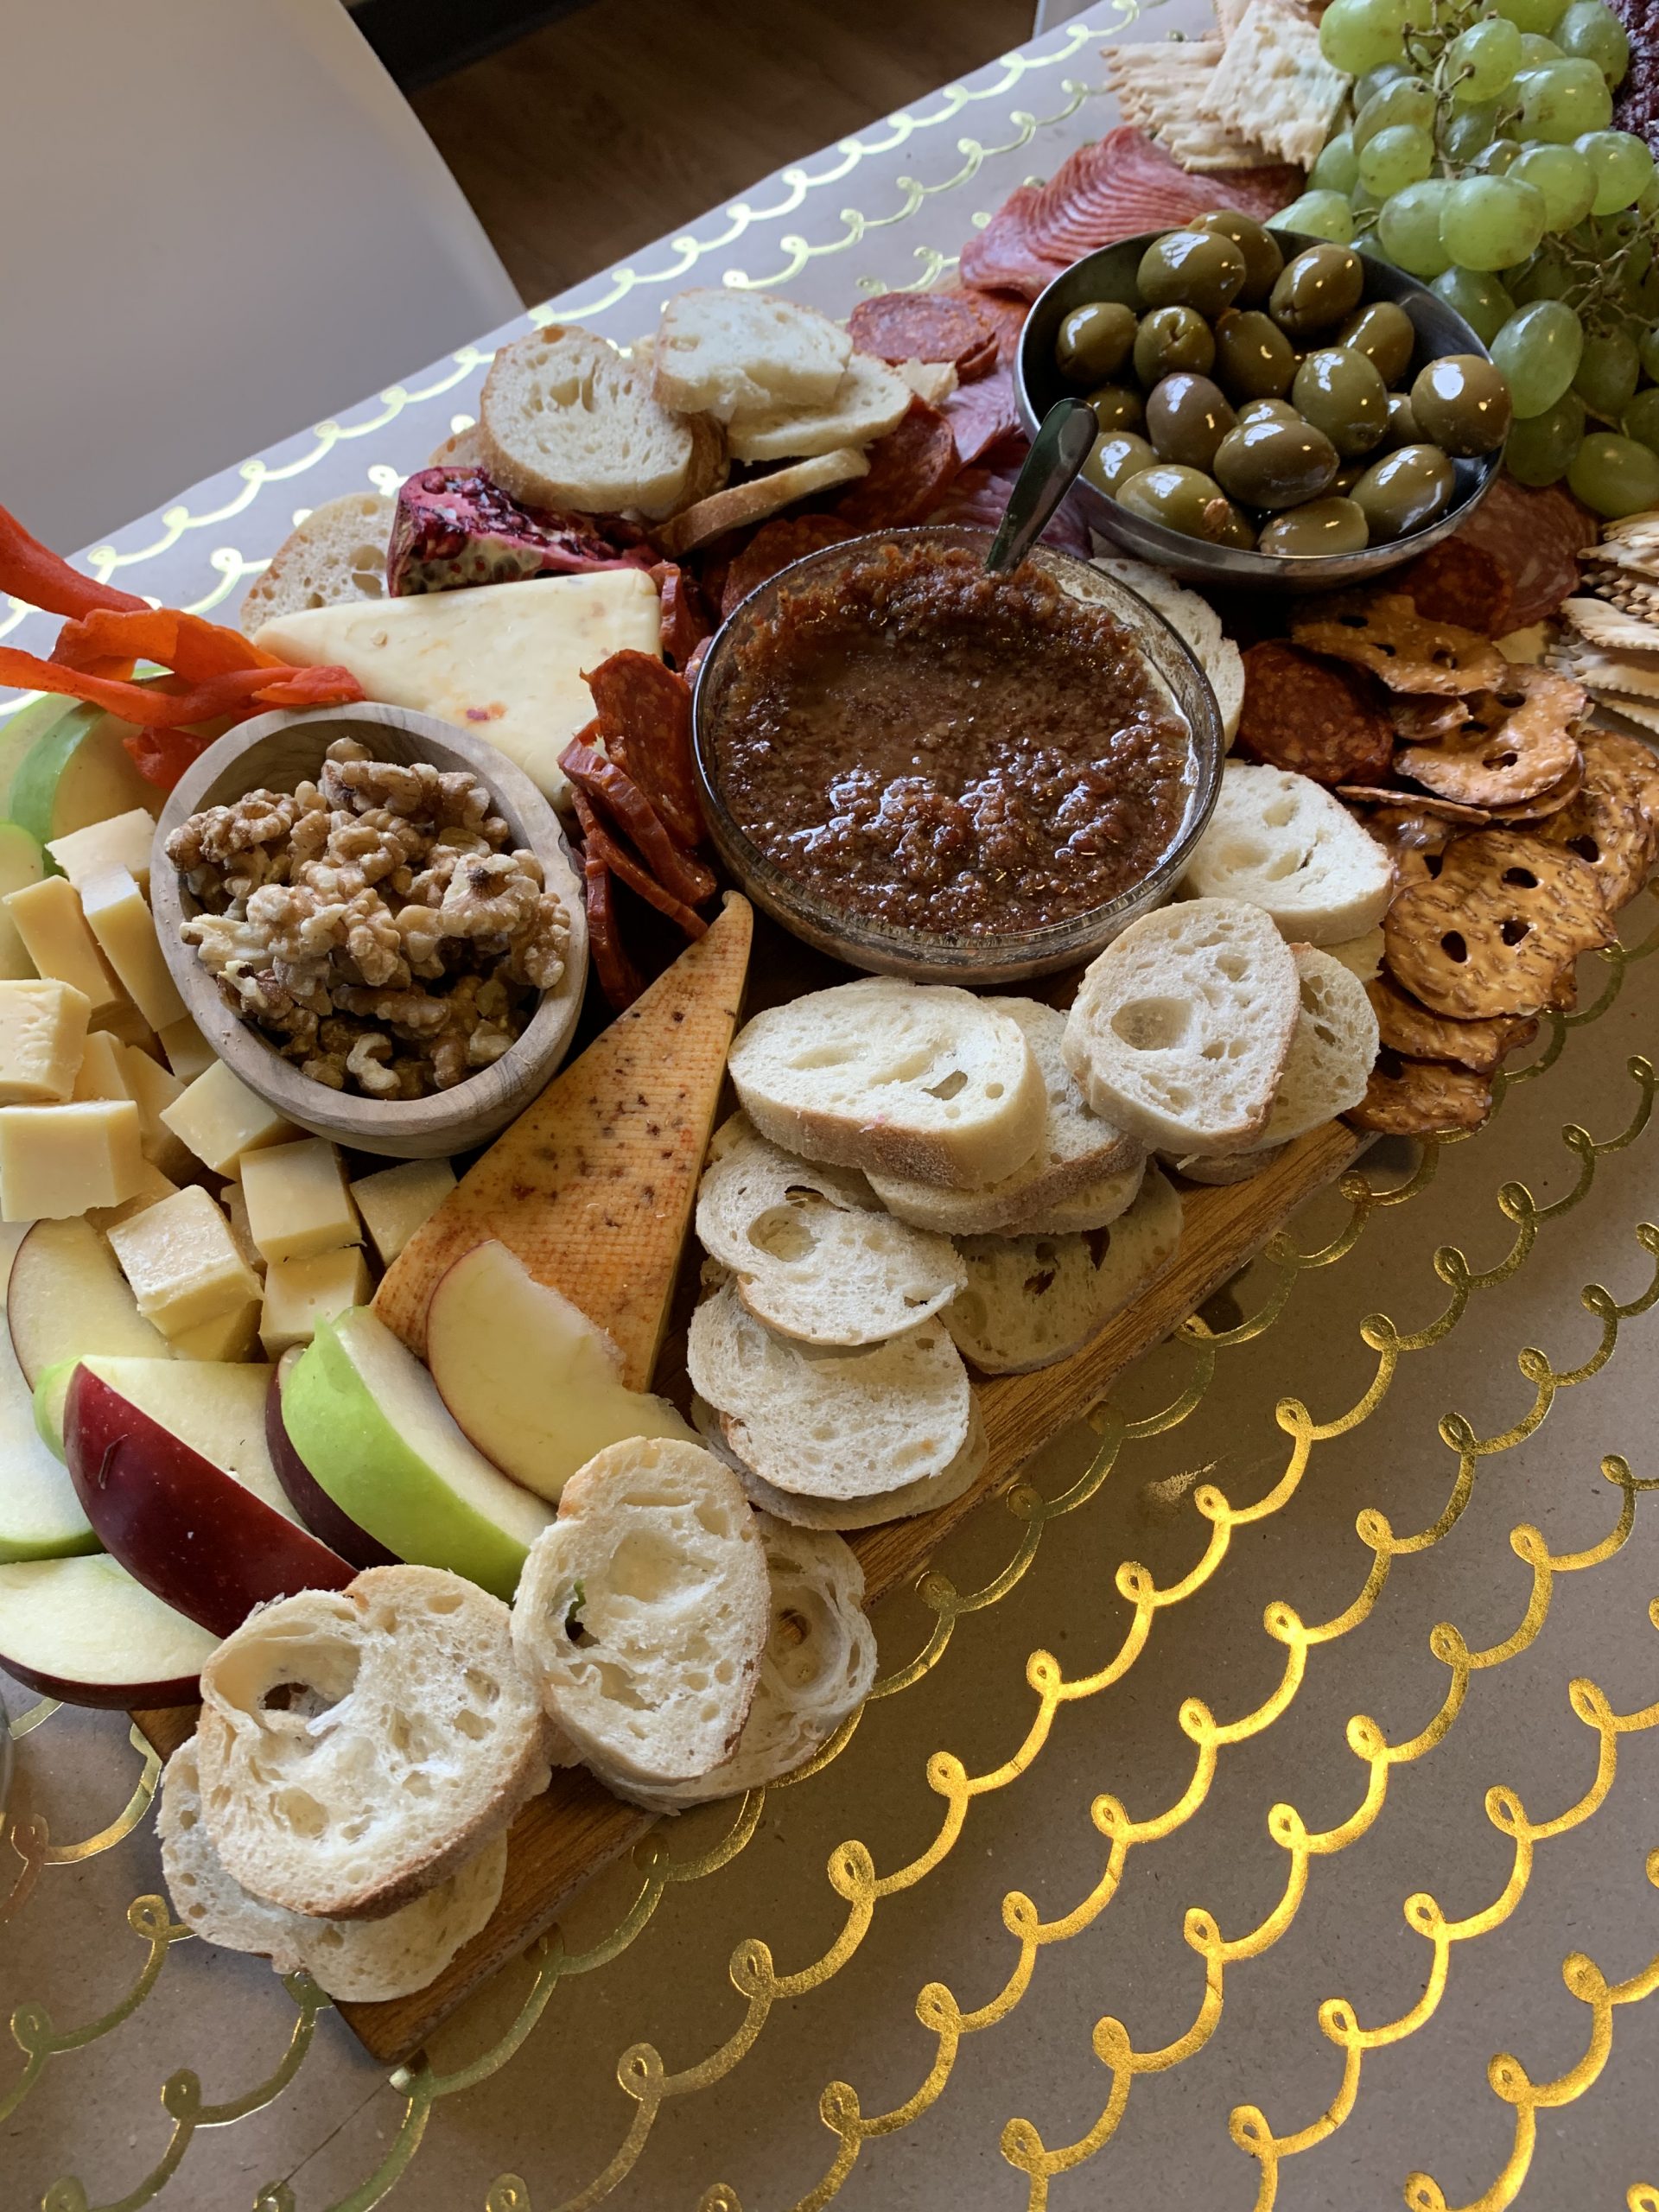 Christmas Eve + My First Grazing Board - Sharing all the details on our Christmas Eve party + creating my first charcuterie grazing board! | Grazing board ingredients - Grazing Board Styling - Grazing board for the holidays